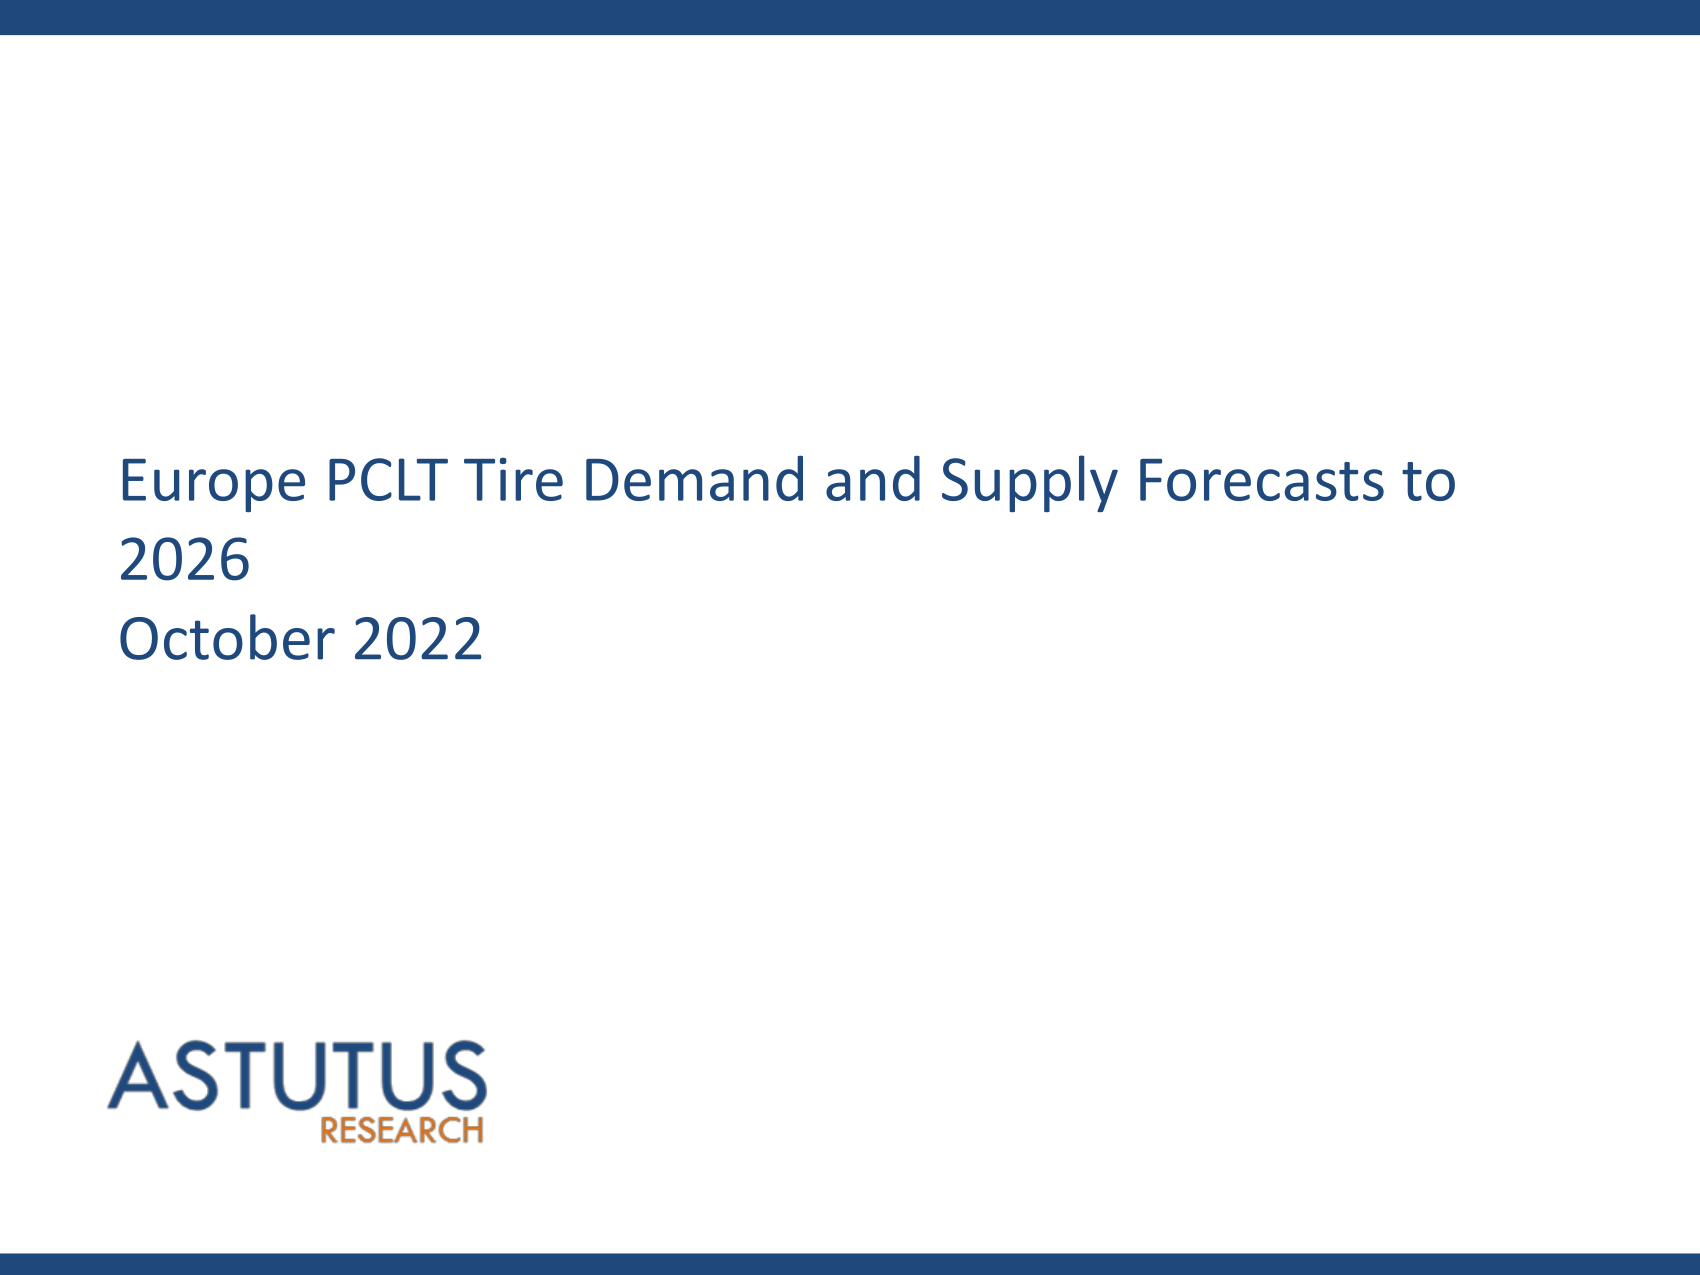 Europe PCLT Tire Market Supply & Demand Forecasts to 2026